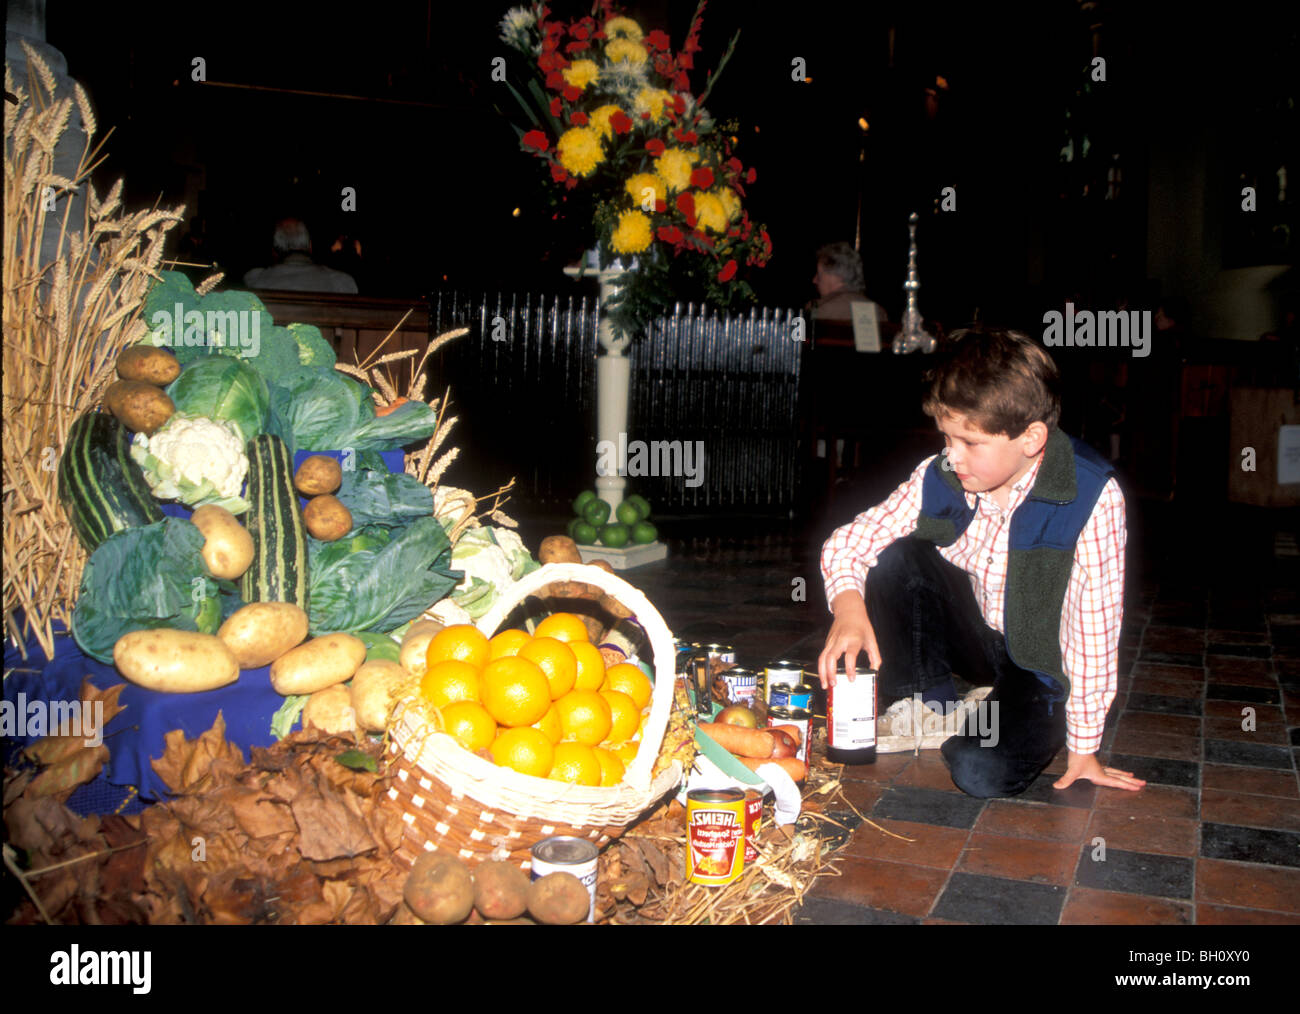 Young boy placing food for the Harvest Festival display in his church, St Saviours, Pimlico. London. Stock Photo